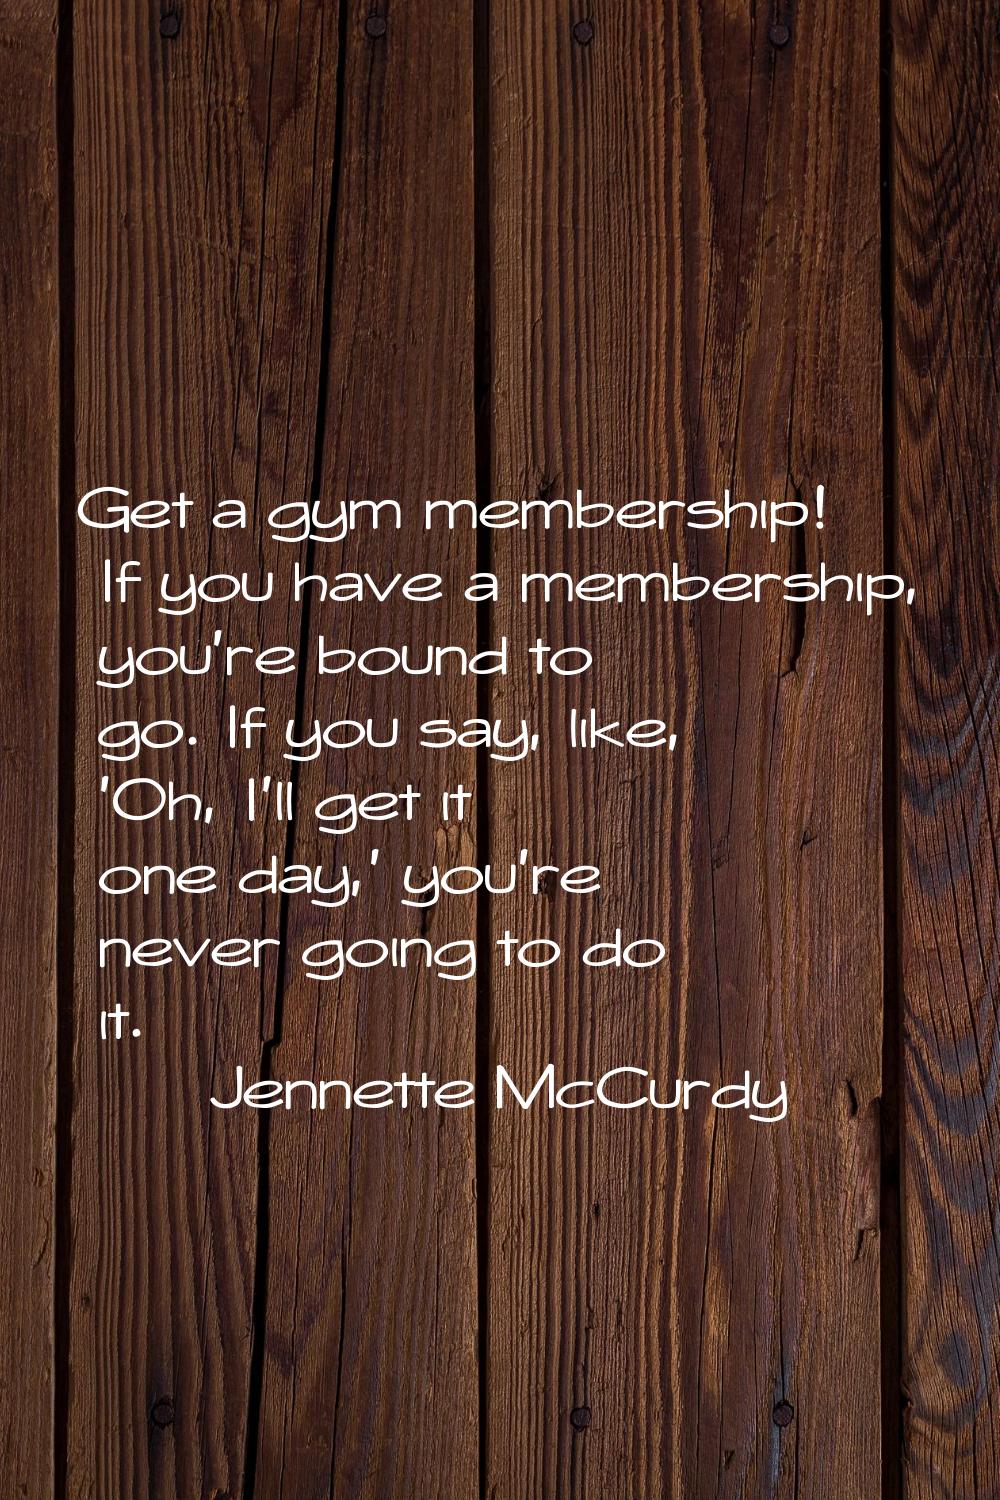 Get a gym membership! If you have a membership, you're bound to go. If you say, like, 'Oh, I'll get